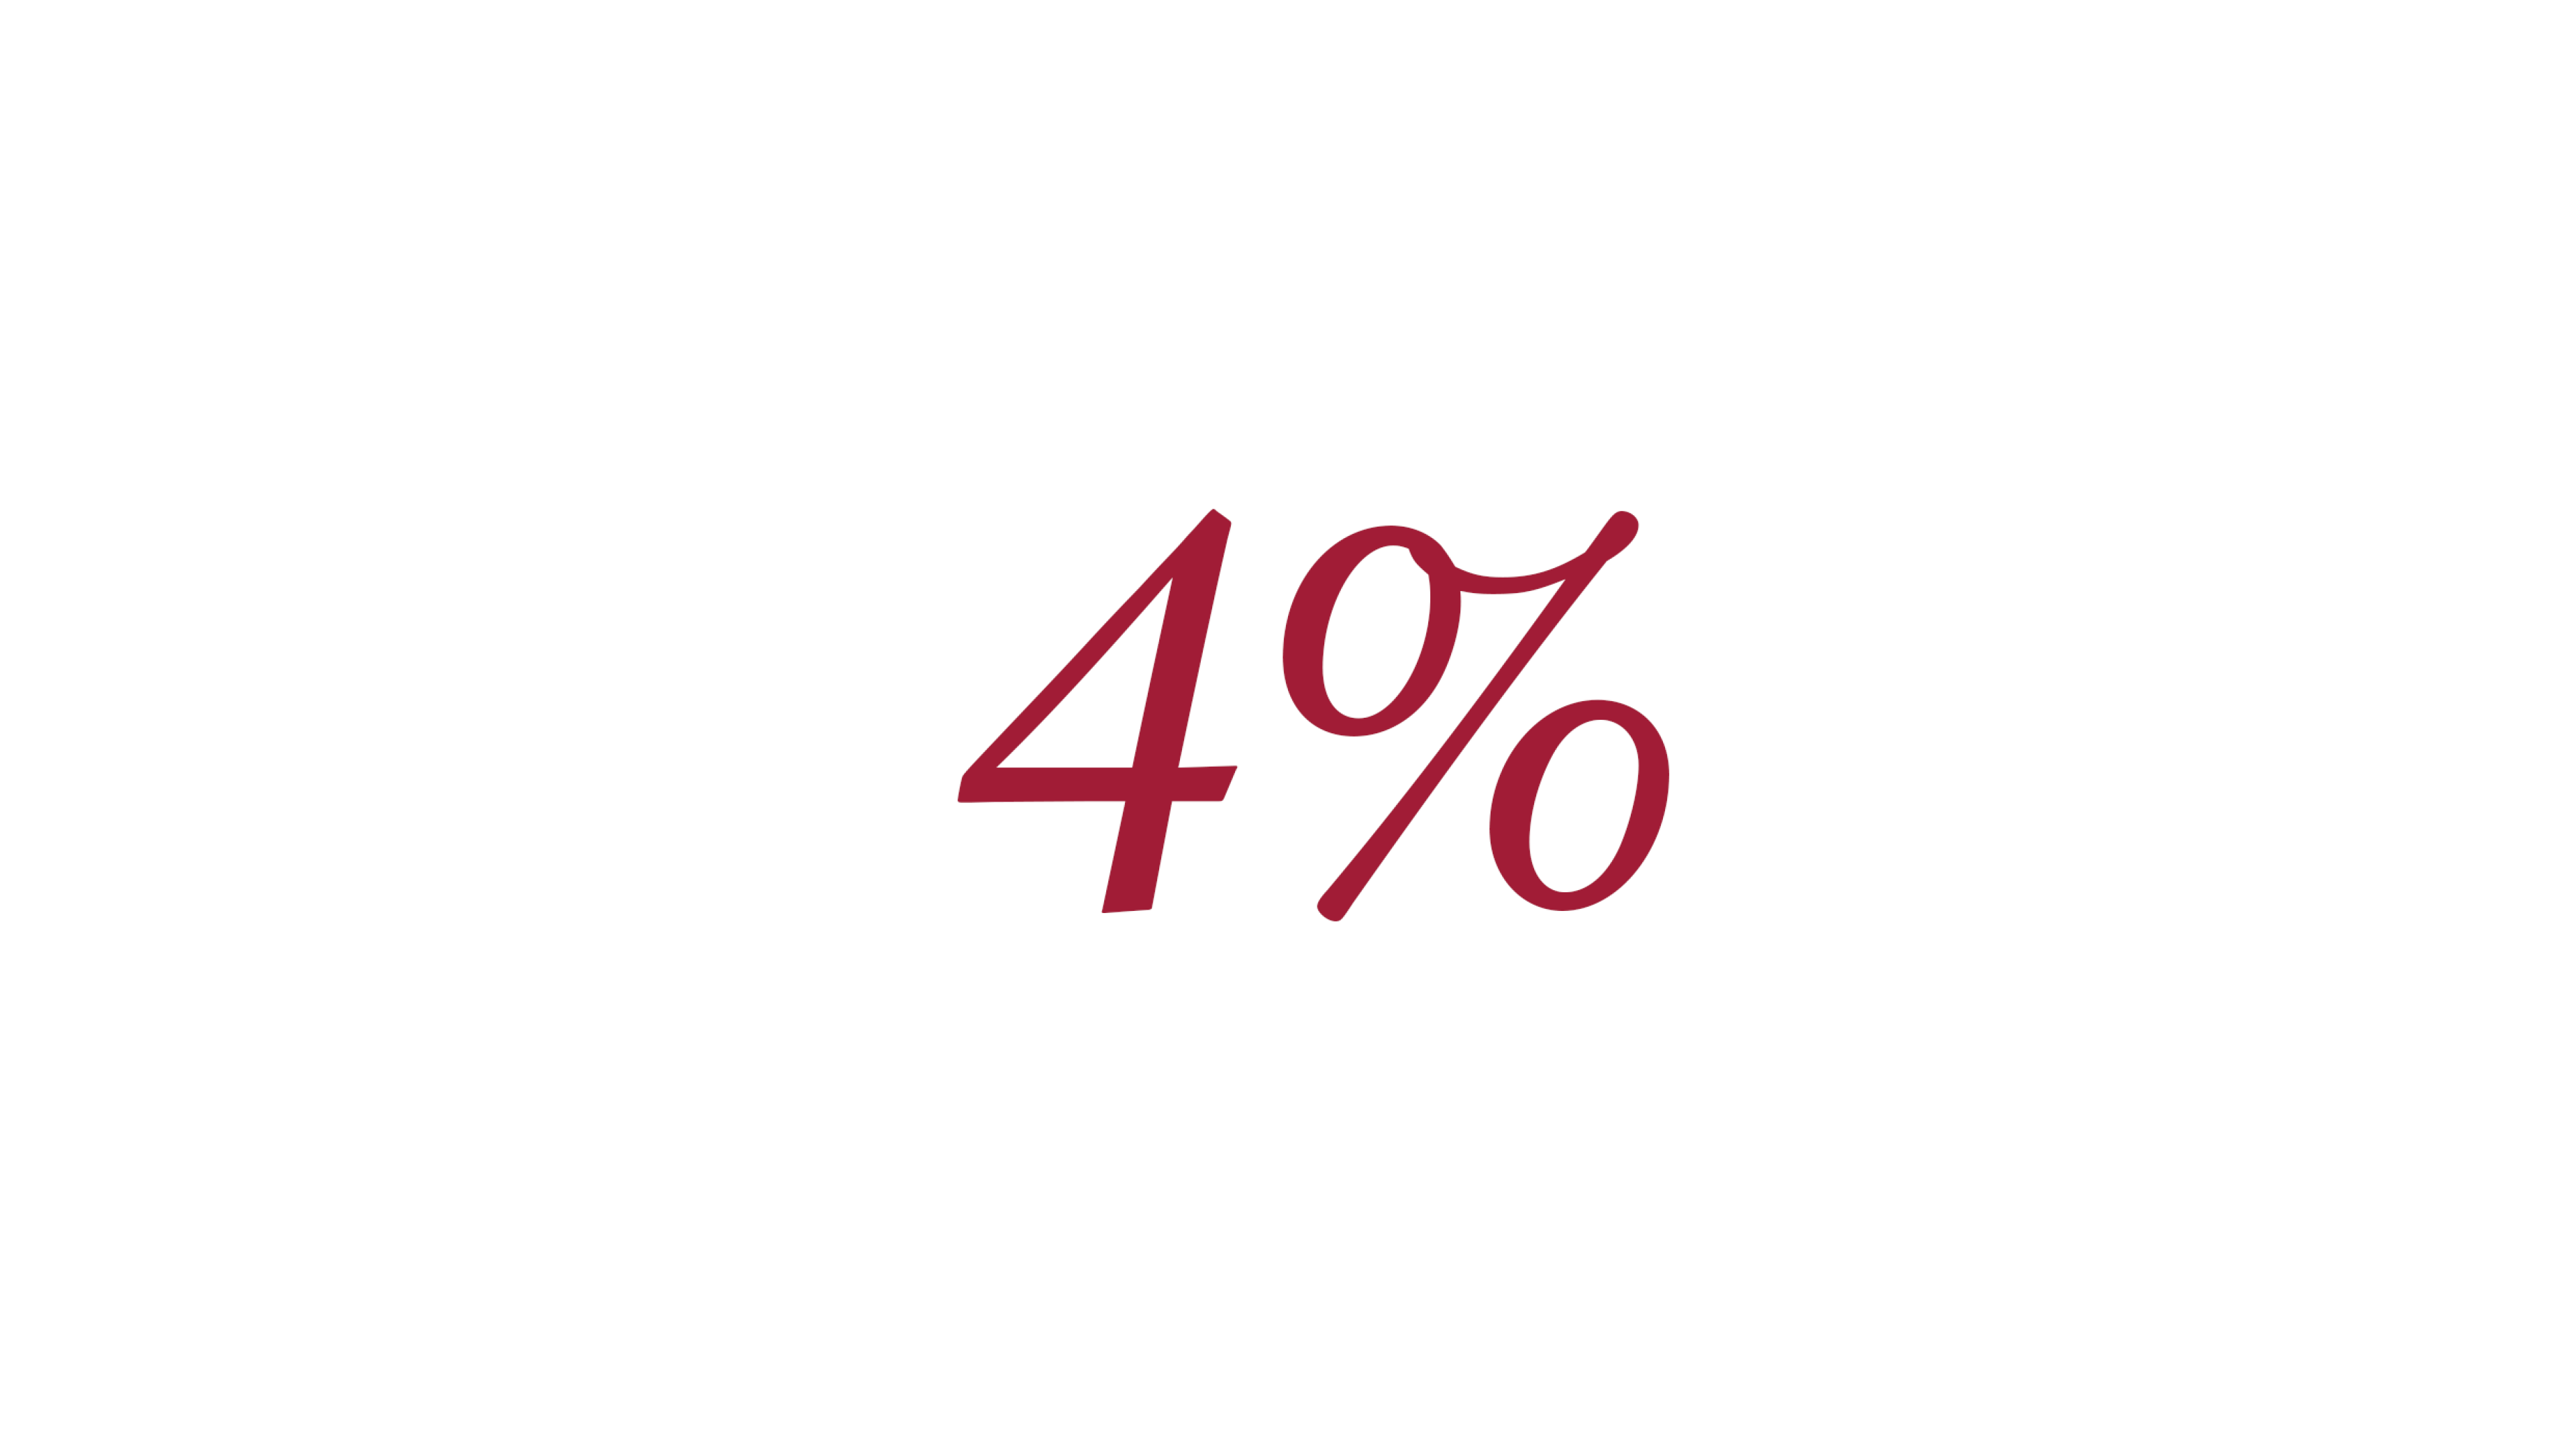 Graphic shows 4%